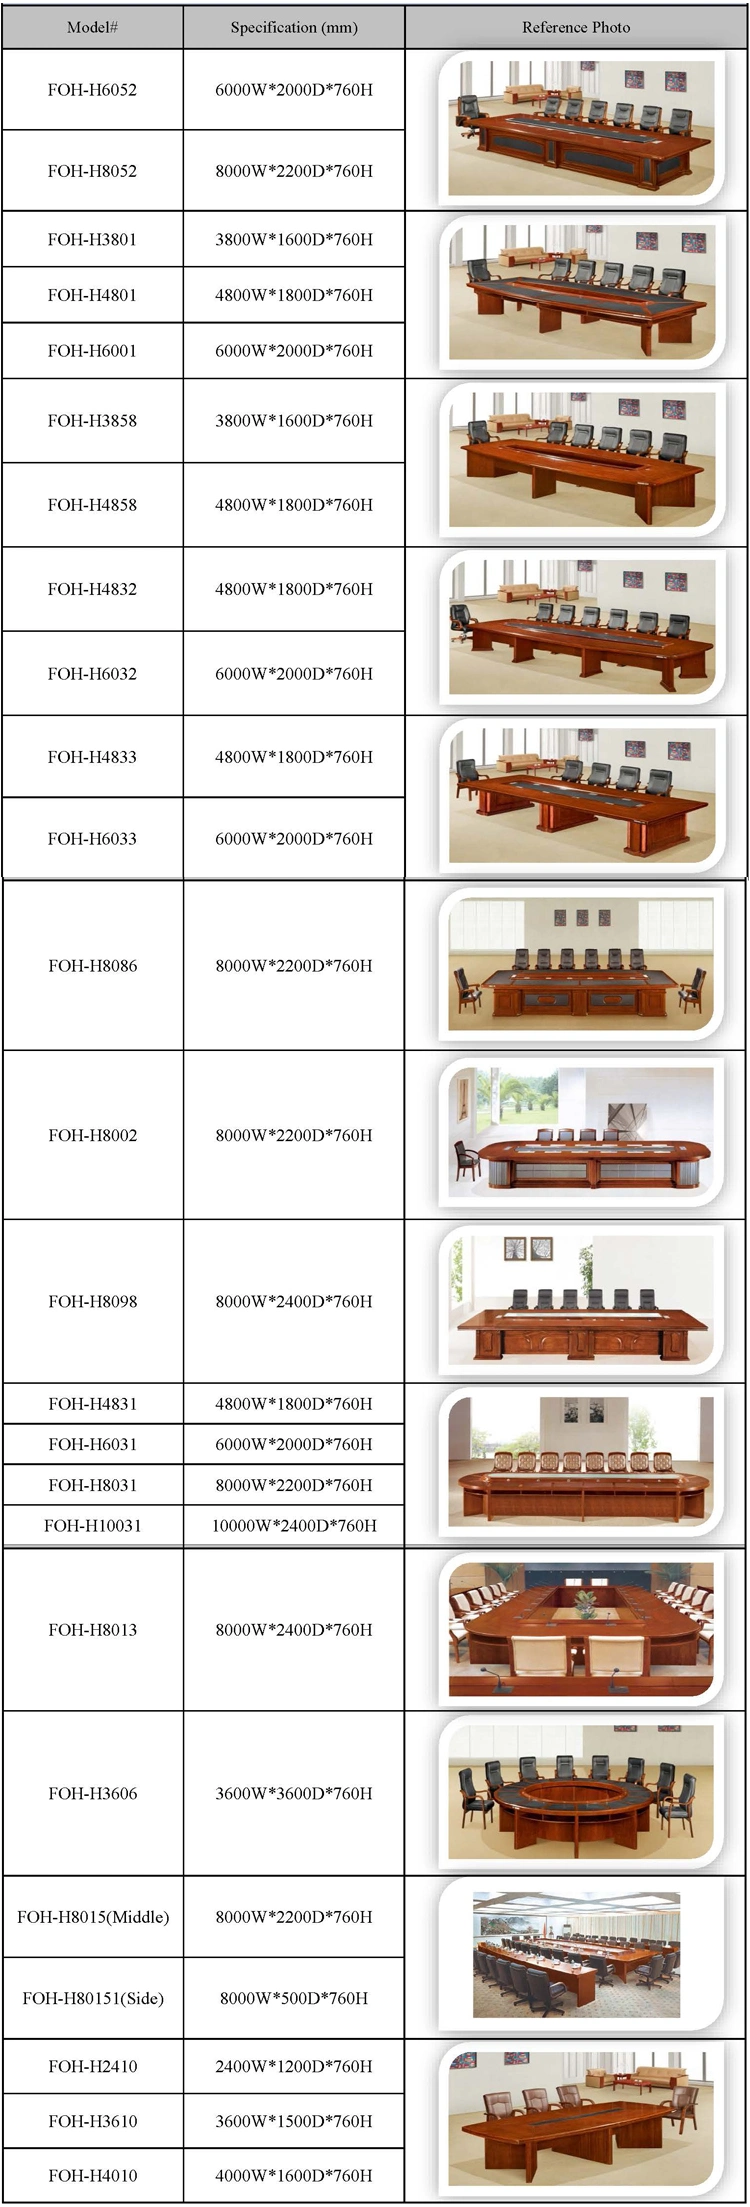 American High End Unique Conference Furniture Conference Tables